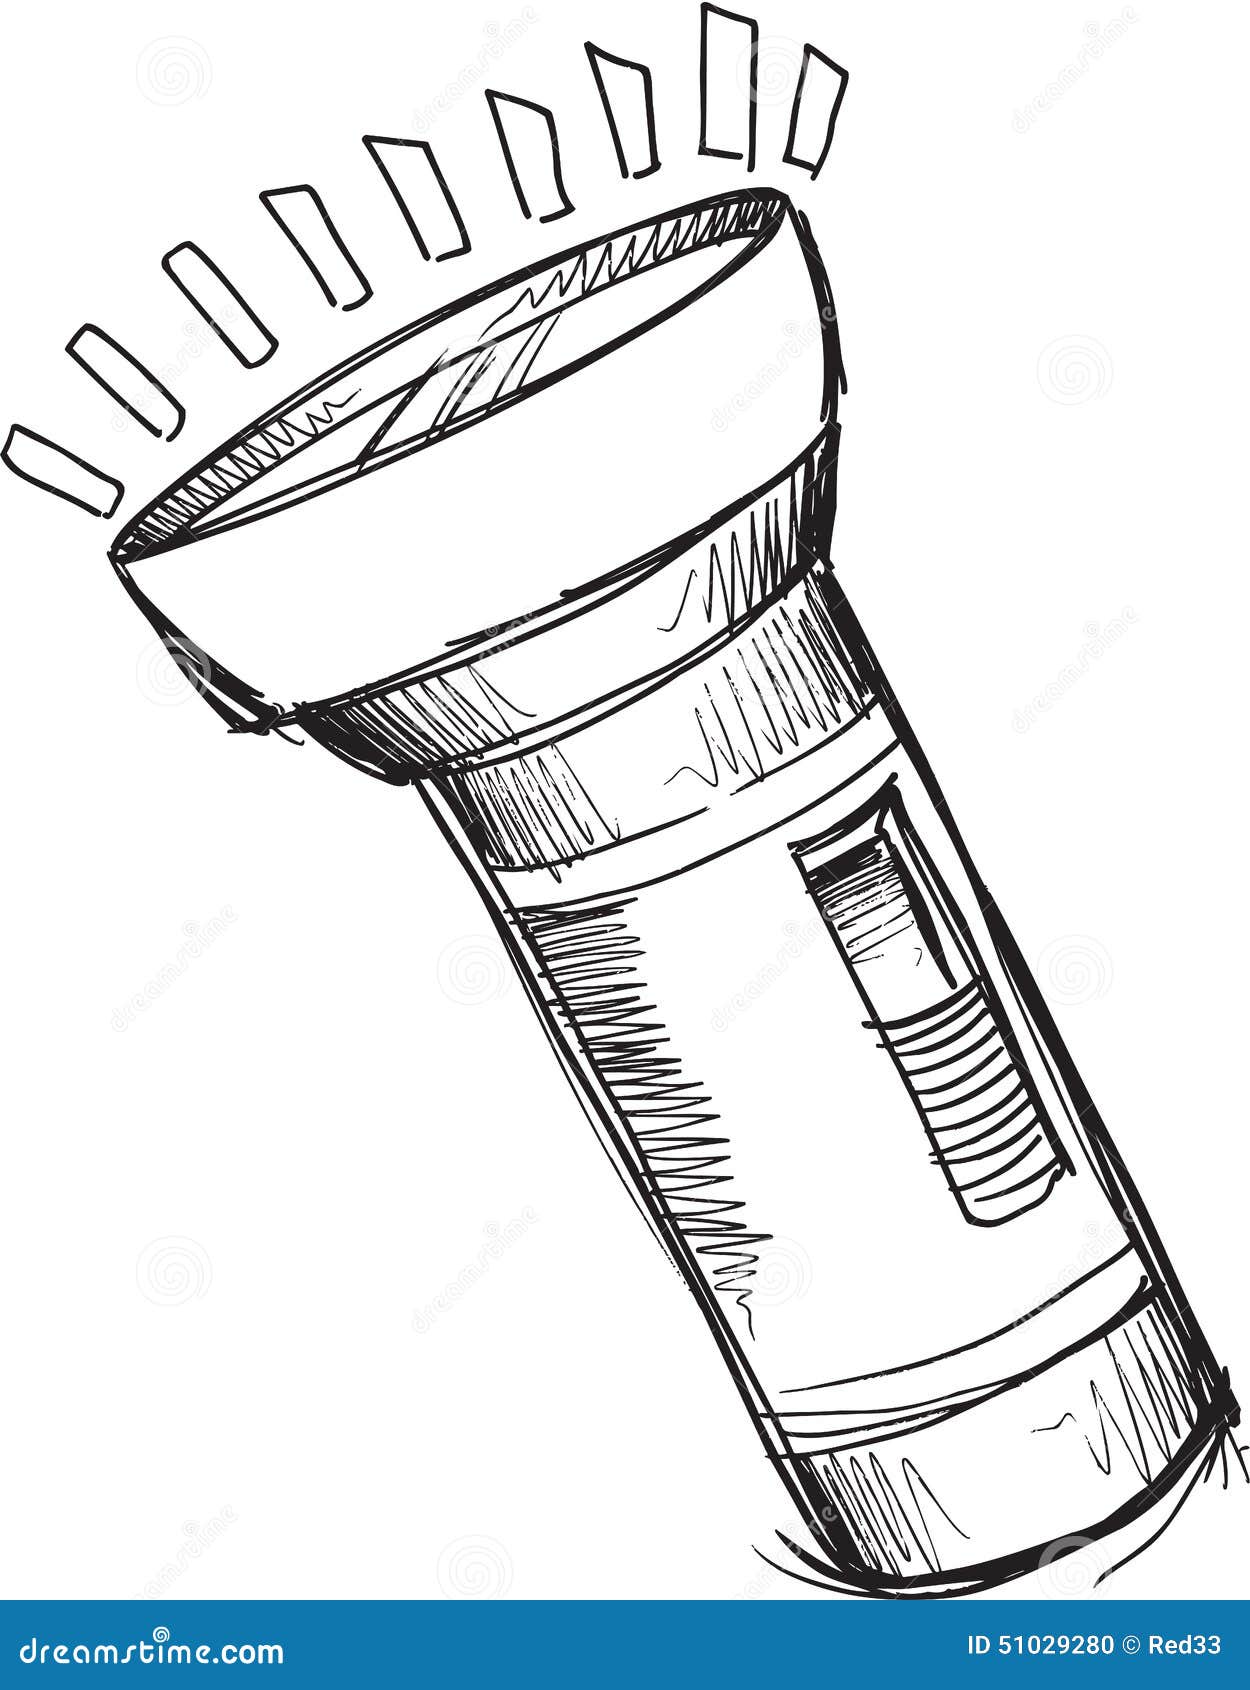 Doodle Flashlight Vector stock vector. Illustration of doodle - 51029280